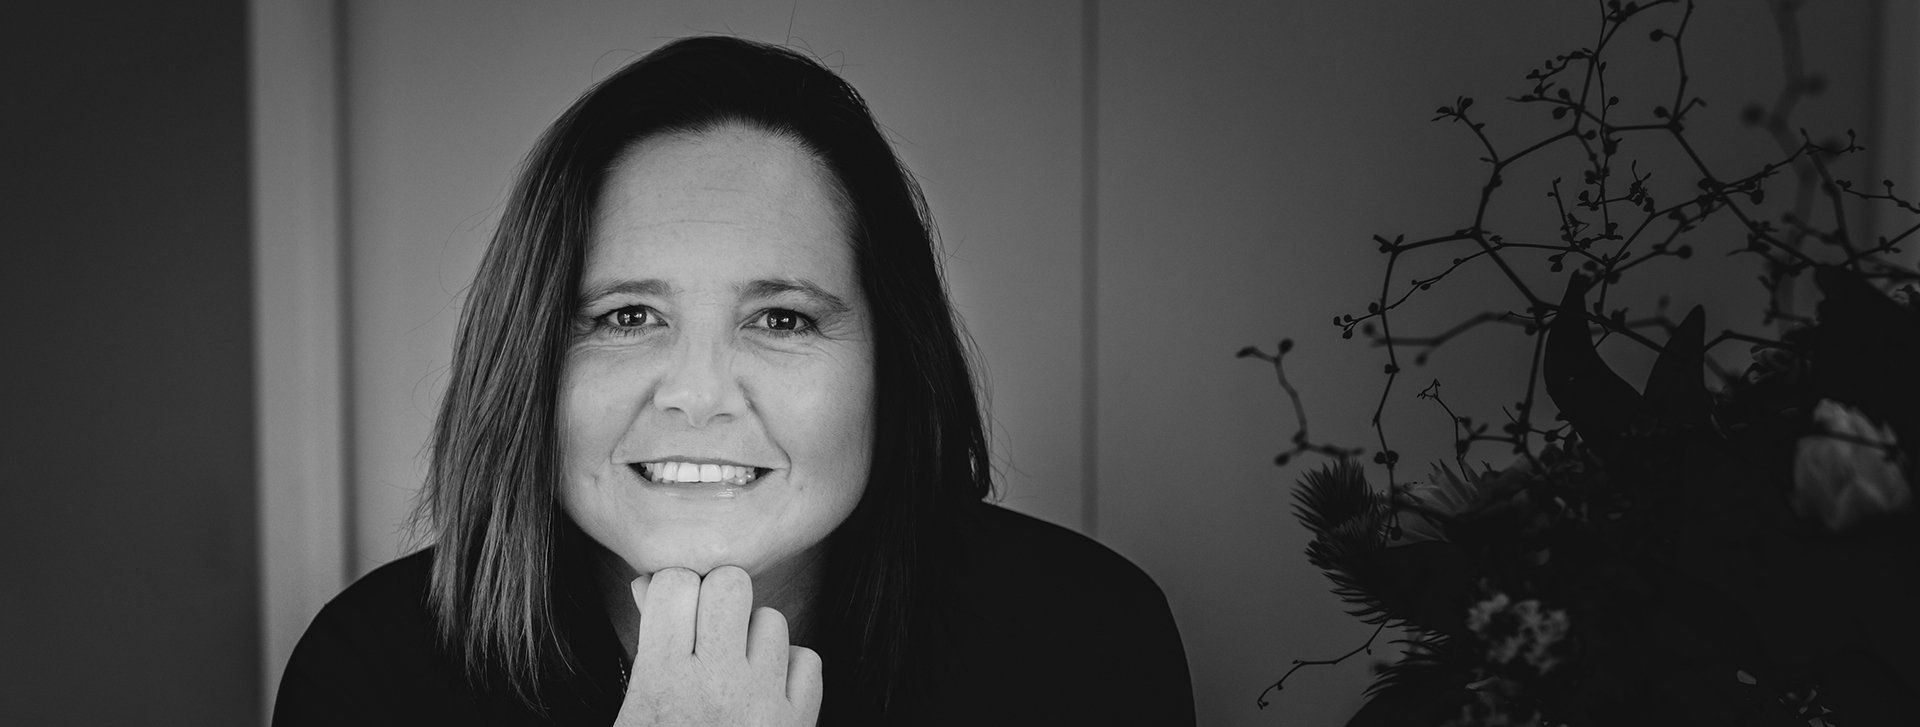 Kirsty Trolove, founder and owner of Only Human - HR - Recruitment - Temps in Christchurch and Marlborough